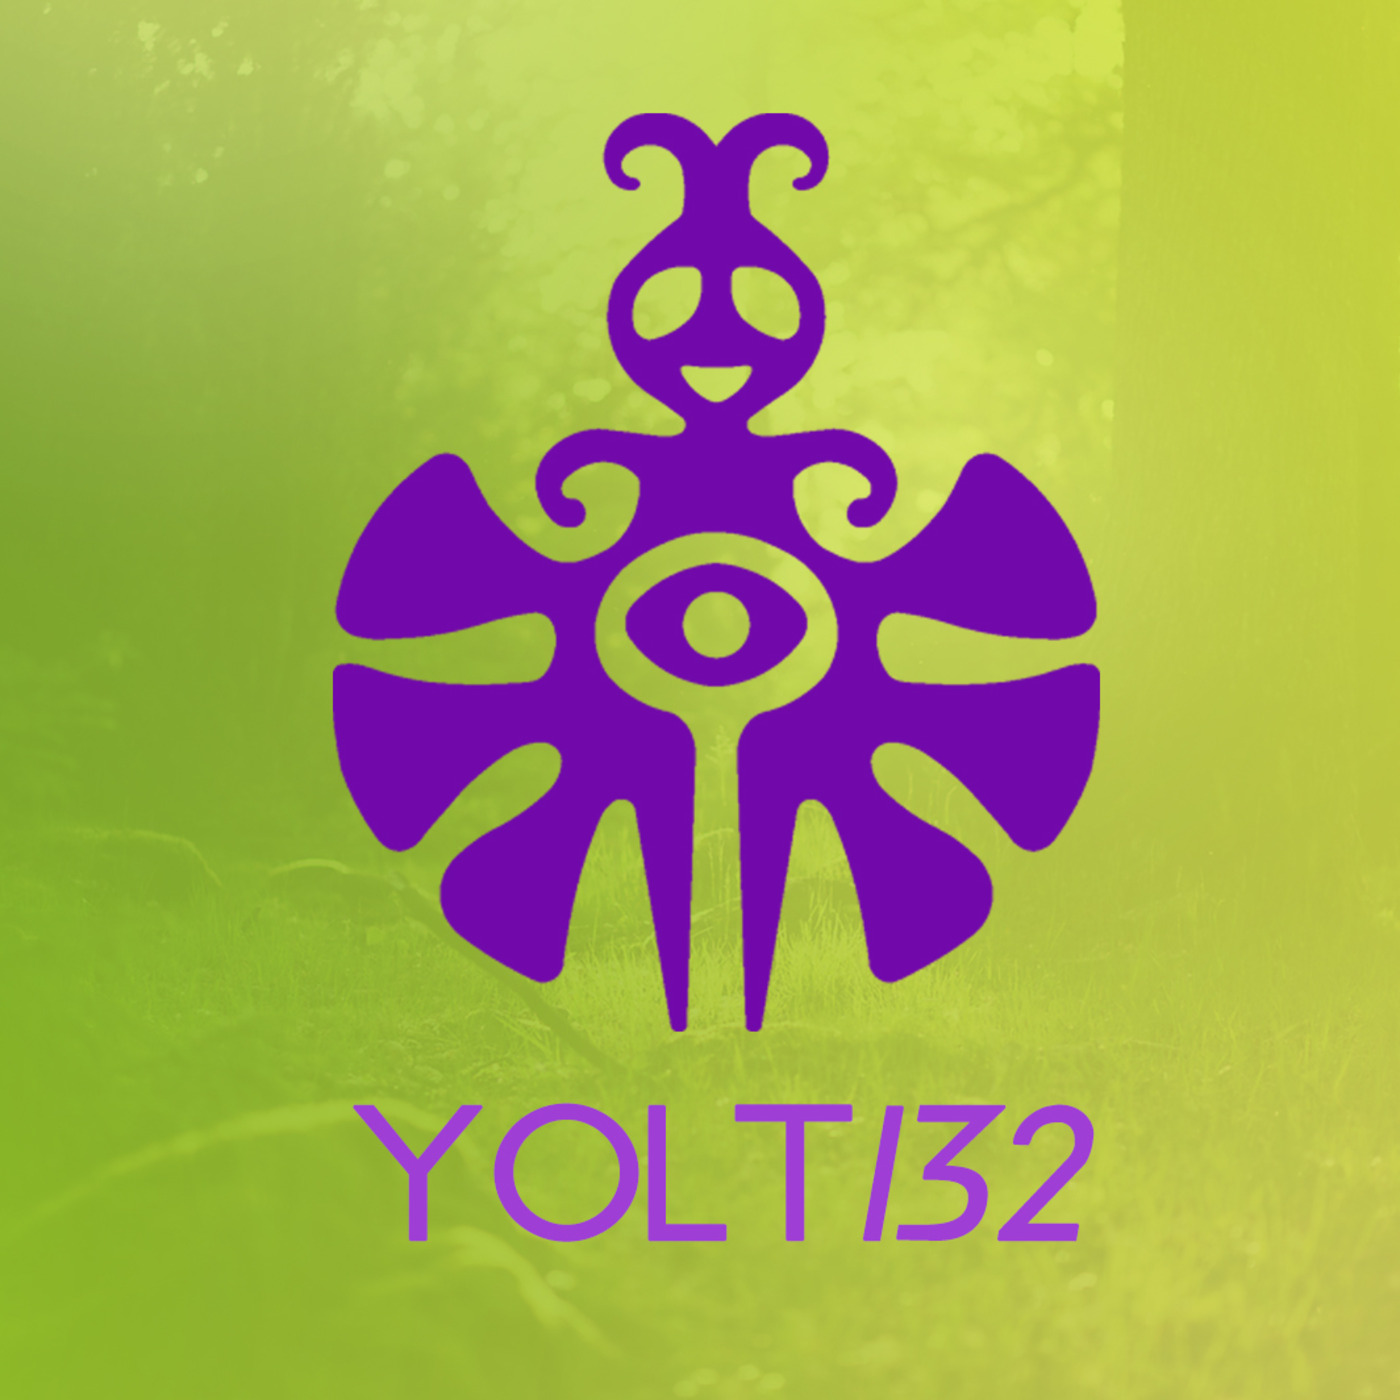 You Only Live Trance Episode 132 (#YOLT132) - Ness